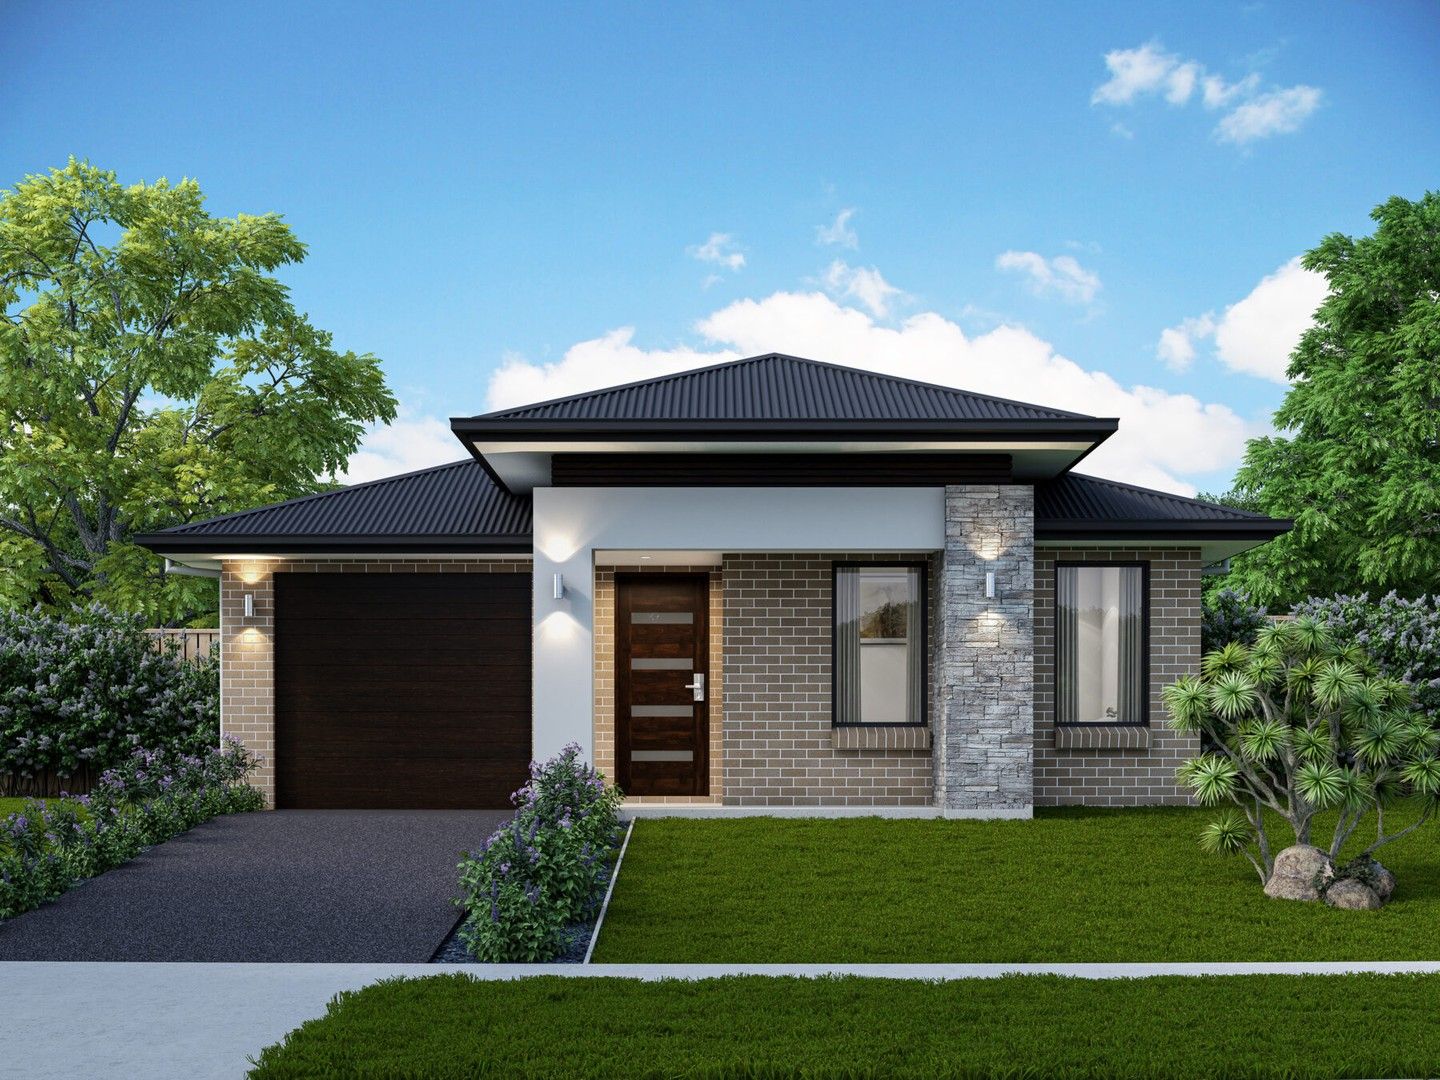 3 bedrooms New House & Land in CALL US NOW TO BOOK SITE VISIT BOX HILL NSW, 2765